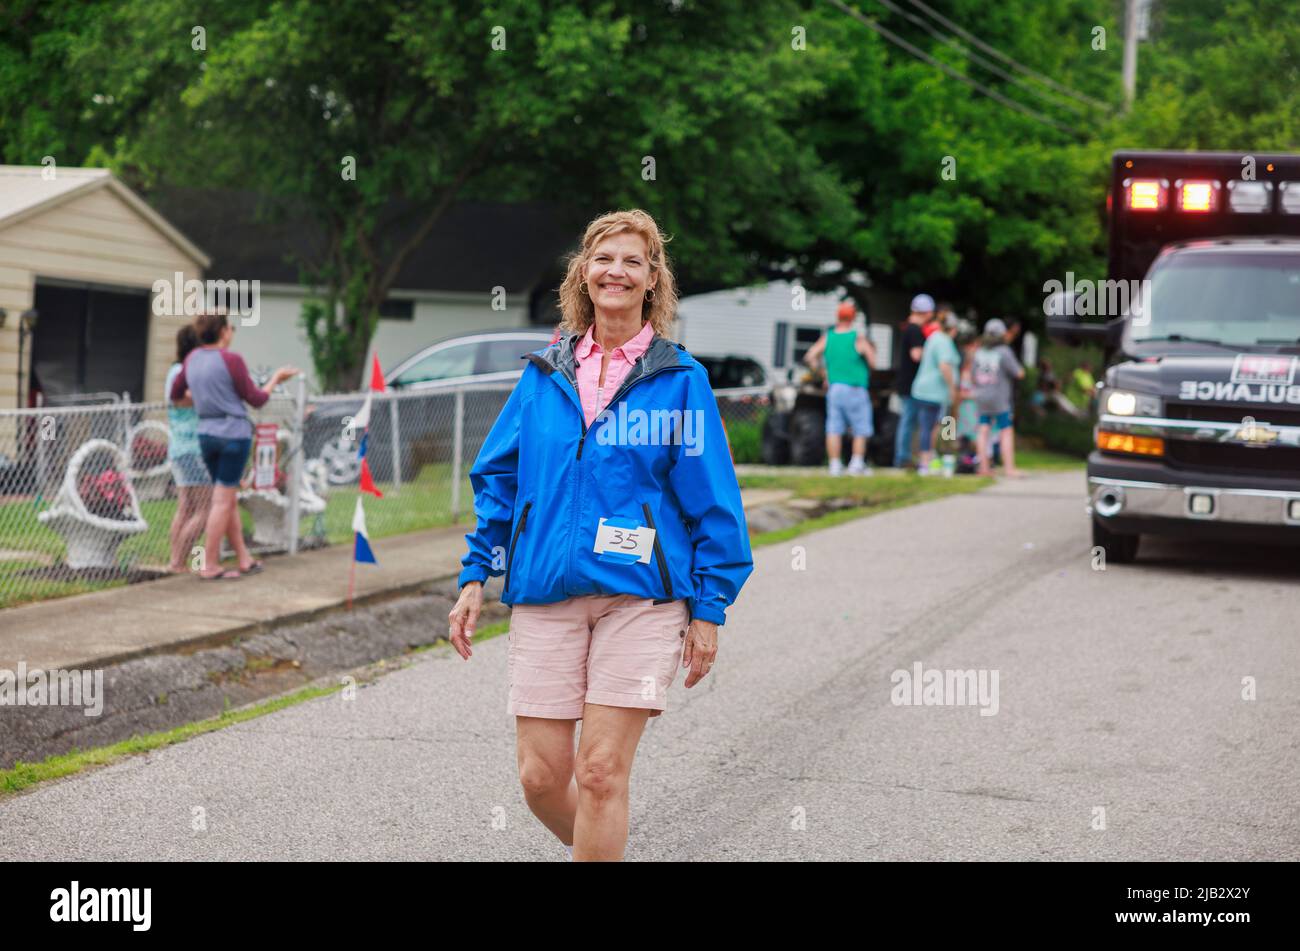 HARRODSBURG, UNITED STATES - 2022/05/21: Democratic Monroe County recorder candidate Amy Swain marching in the Heritage Days Parade on May 21, 2022 in Harrodsburg, Indiana. (Photo by Jeremy Hogan/The Bloomingtonian) Stock Photo